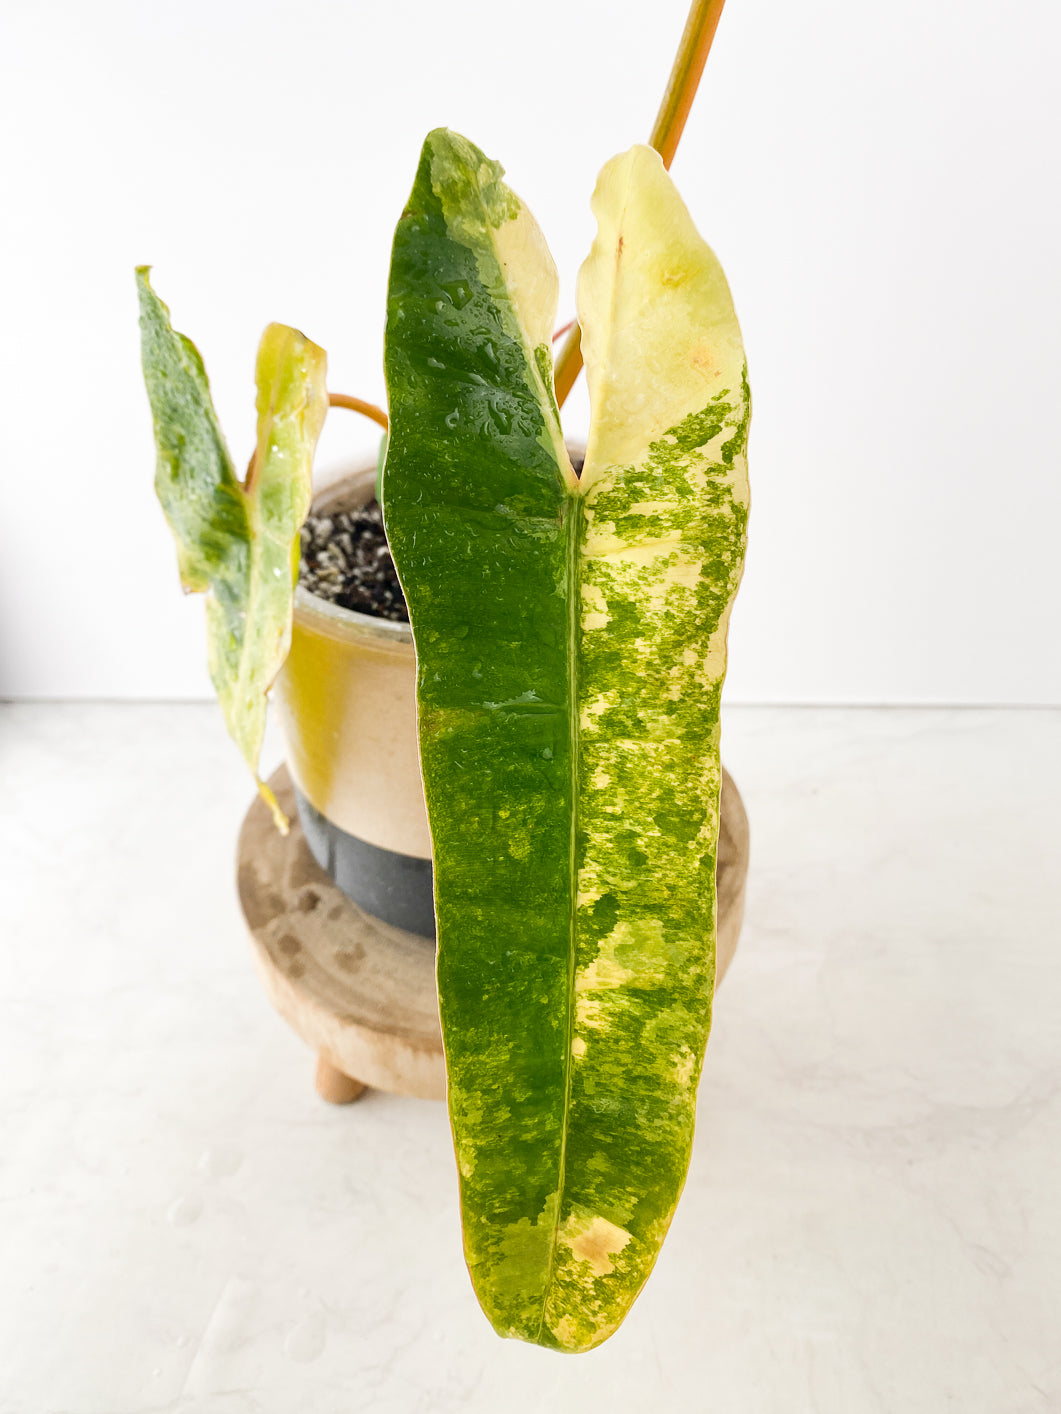 Philodendron Billietiae variegated Slightly Rooted 3 leaves 1 sprout Top Cutting